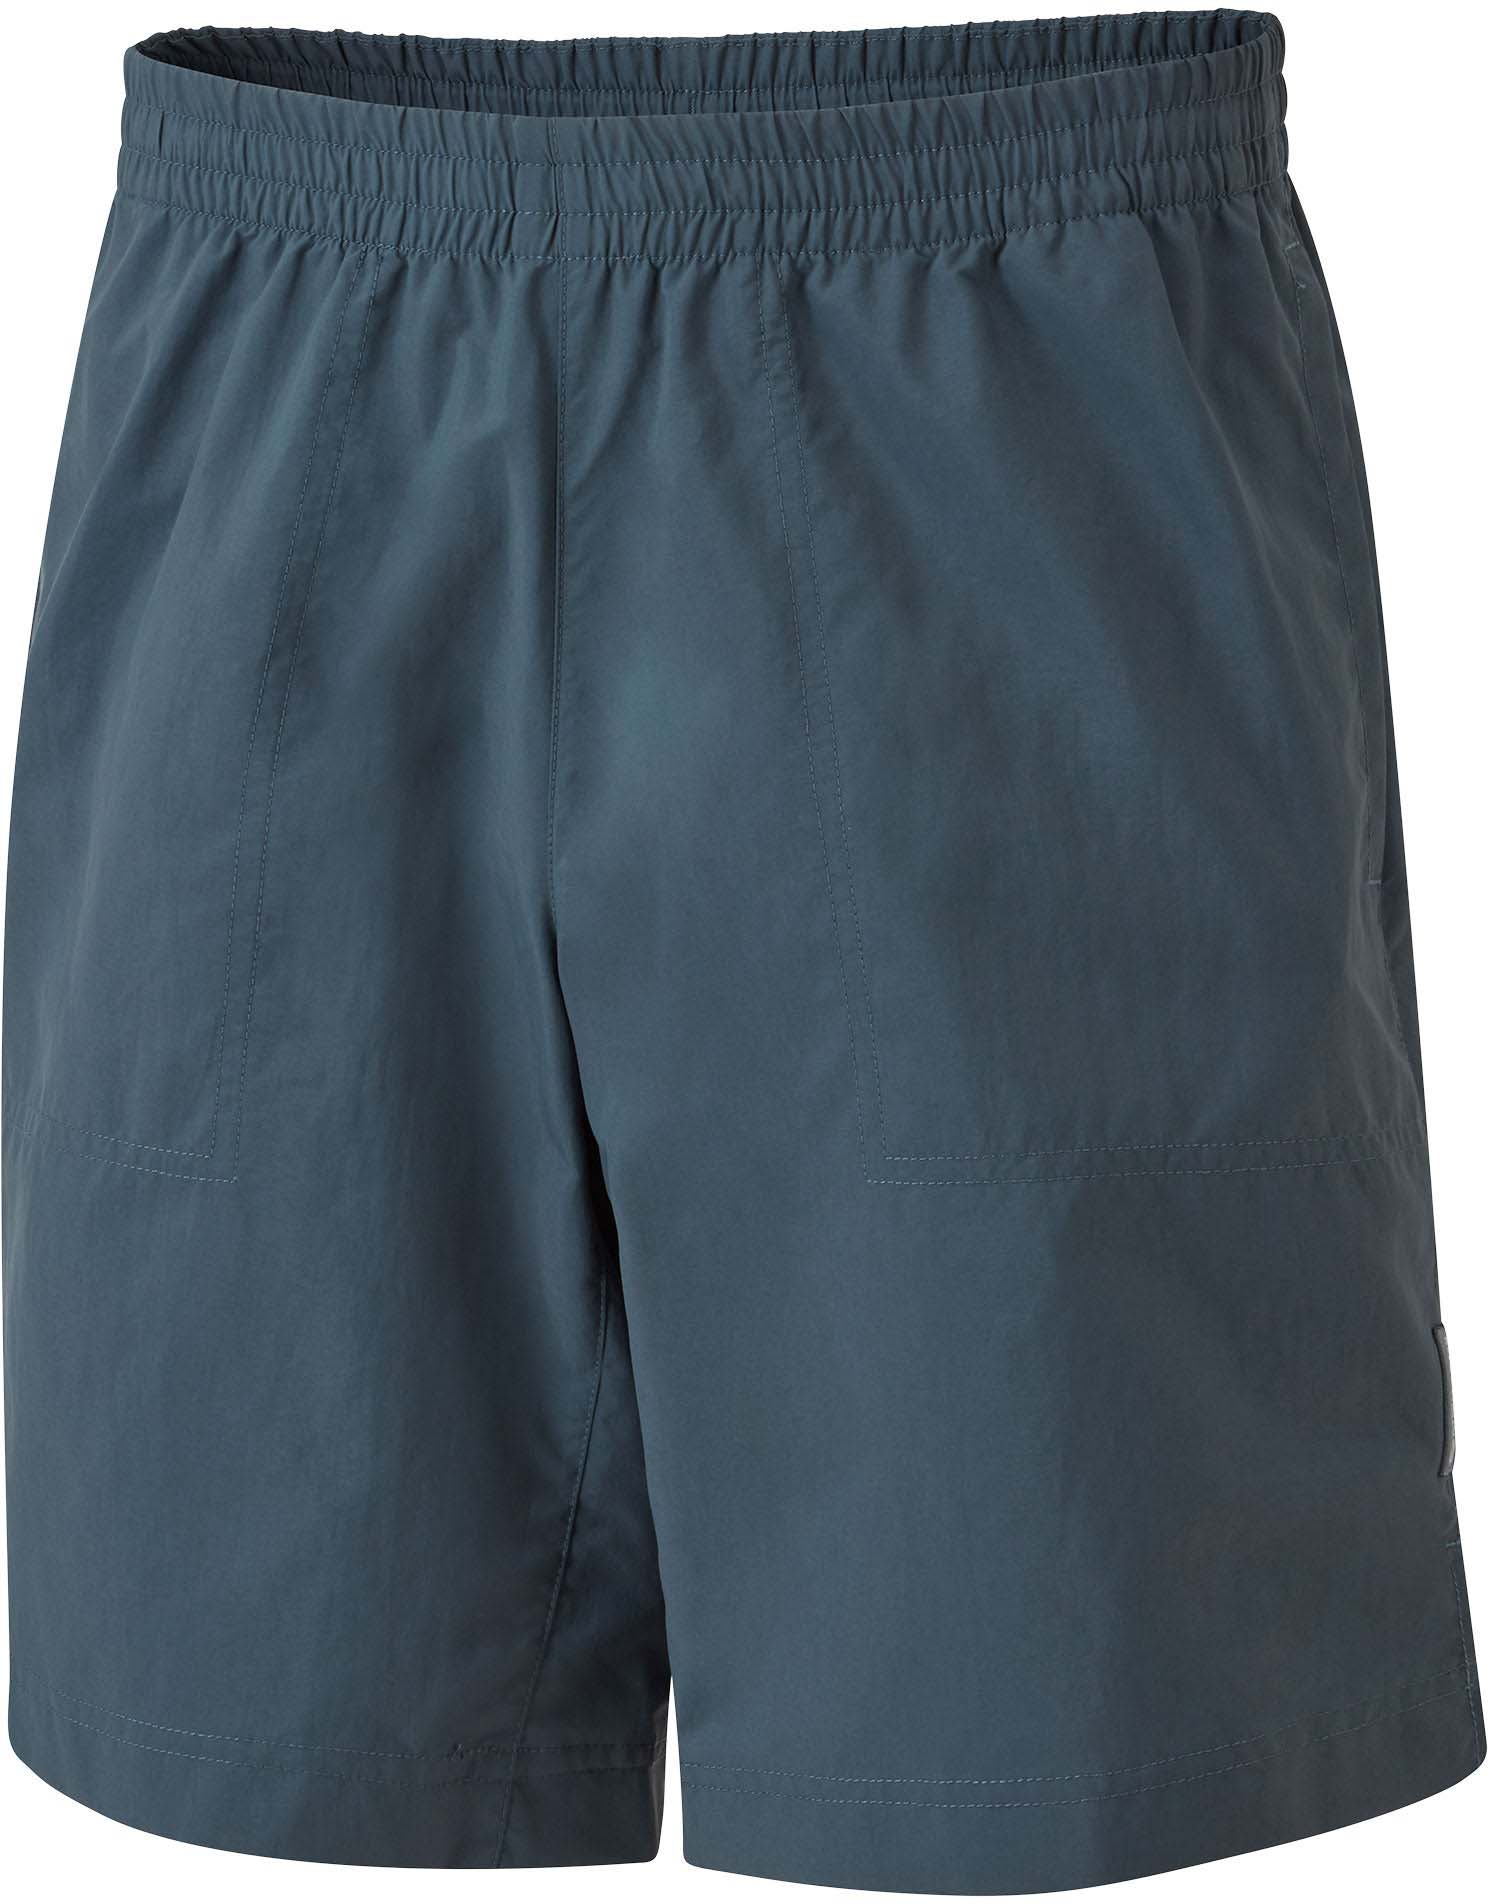 Montane Axial Lite Shorts - Men's | Up to 50% Off 4 Star Rating